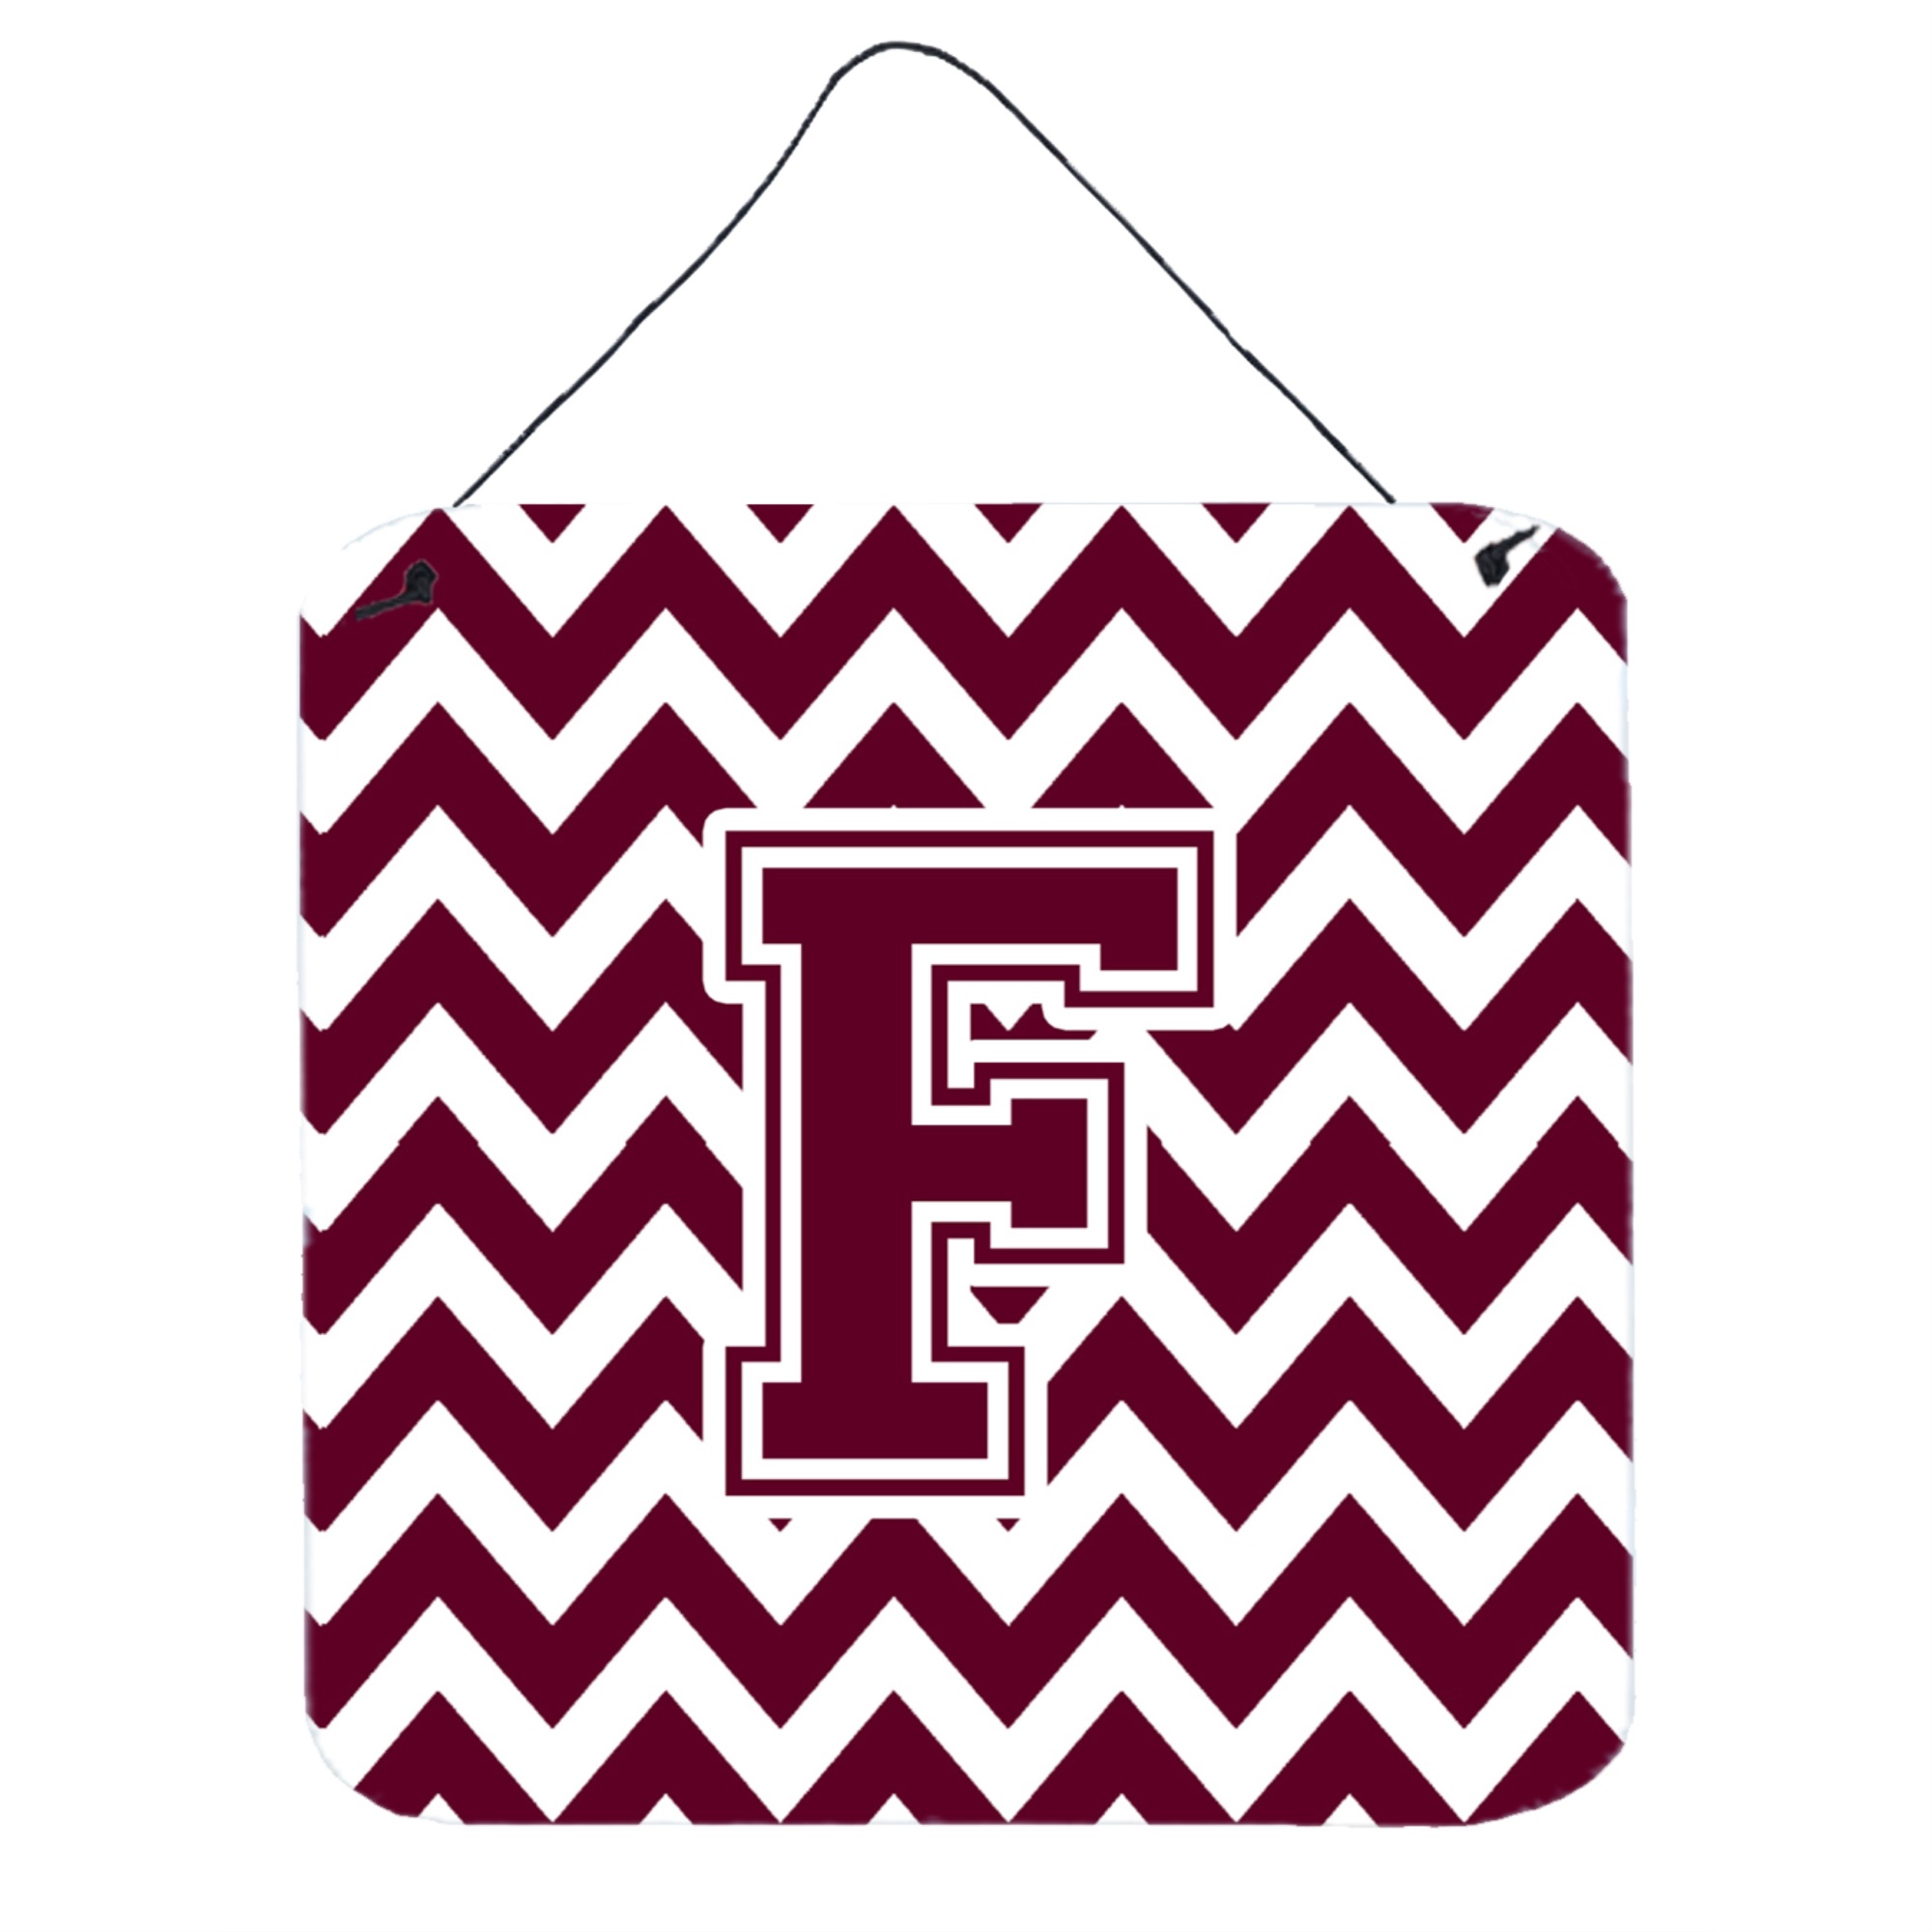 Caroline's Treasures "Caroline's Treasures Letter F Wall or Door Hanging Prints CJ1051-FDS66, 6"" H x 6"" W, Chevron - White and Maroon"